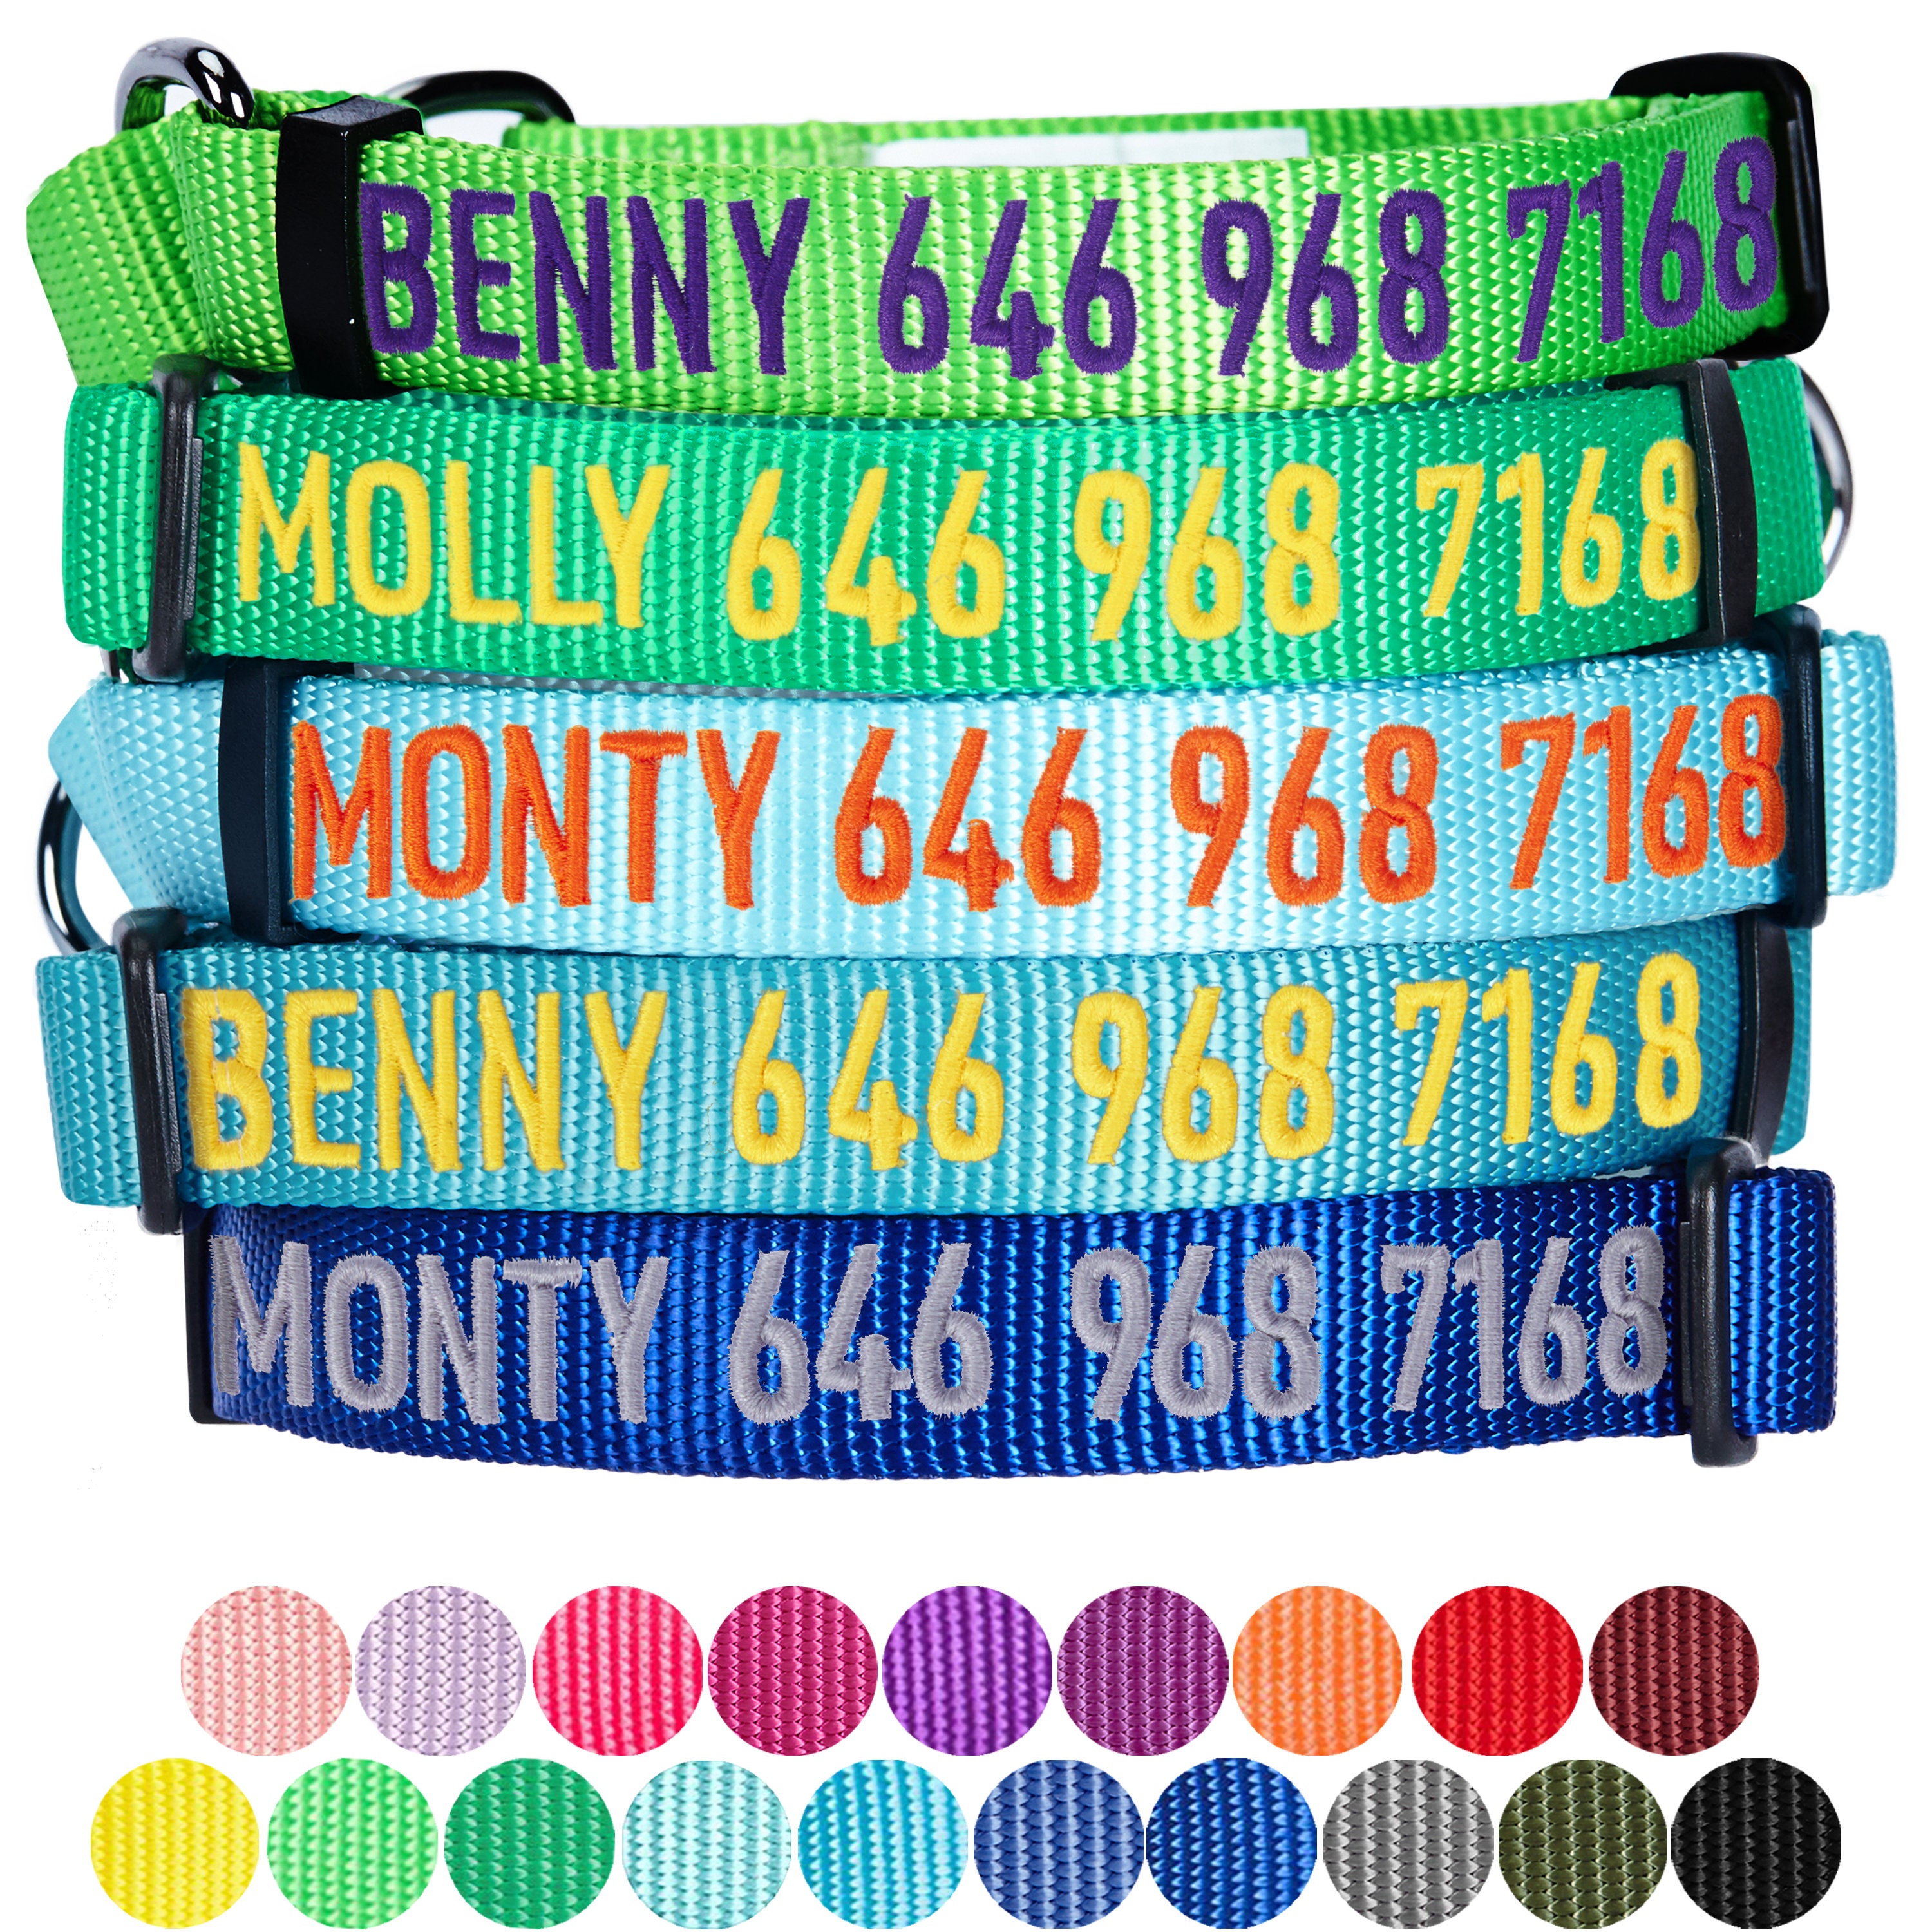 Regular Collars Martingale Collars Personalized Collars or Seatbelts Blueberry Pet Essentials 22 Colors Classic Solid Color Collection 